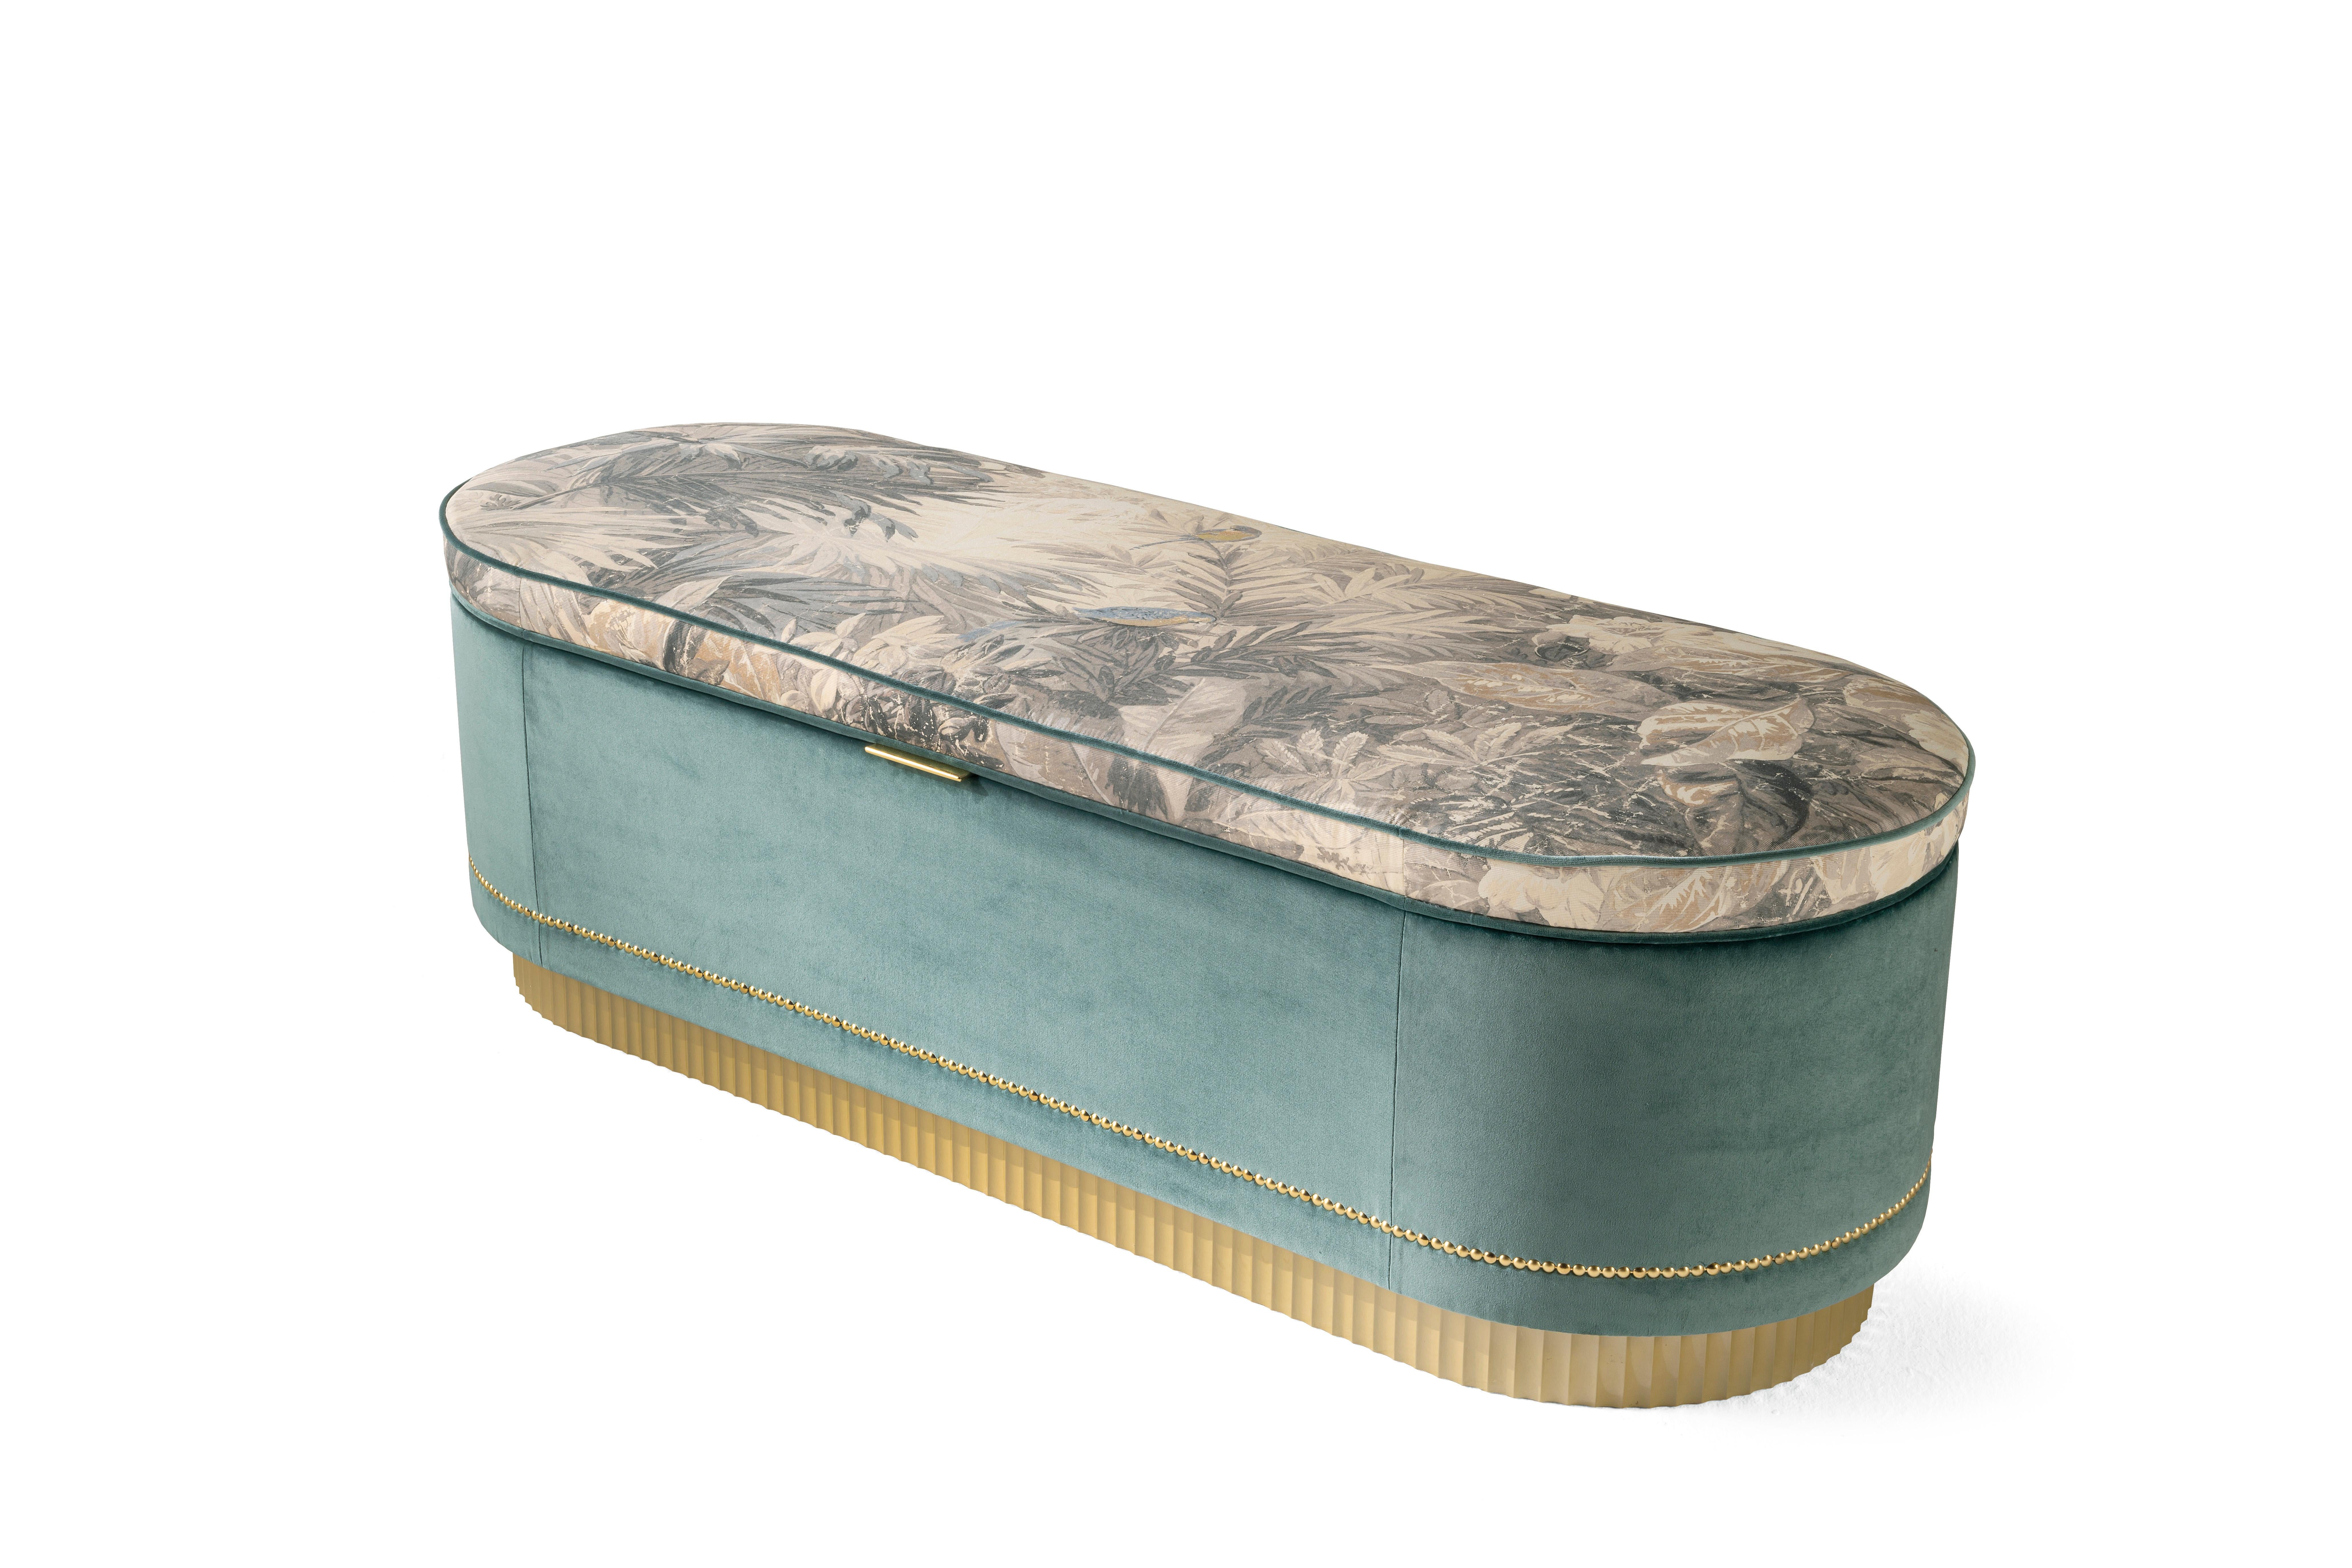 A decorative piece of furniture with exotic suggestions, Meriam pouf is presented with seat upholstery in Selva printed fabric and embellished with golden studs and a fluted gold lacquered base. In this new version, the pouf is also a precious